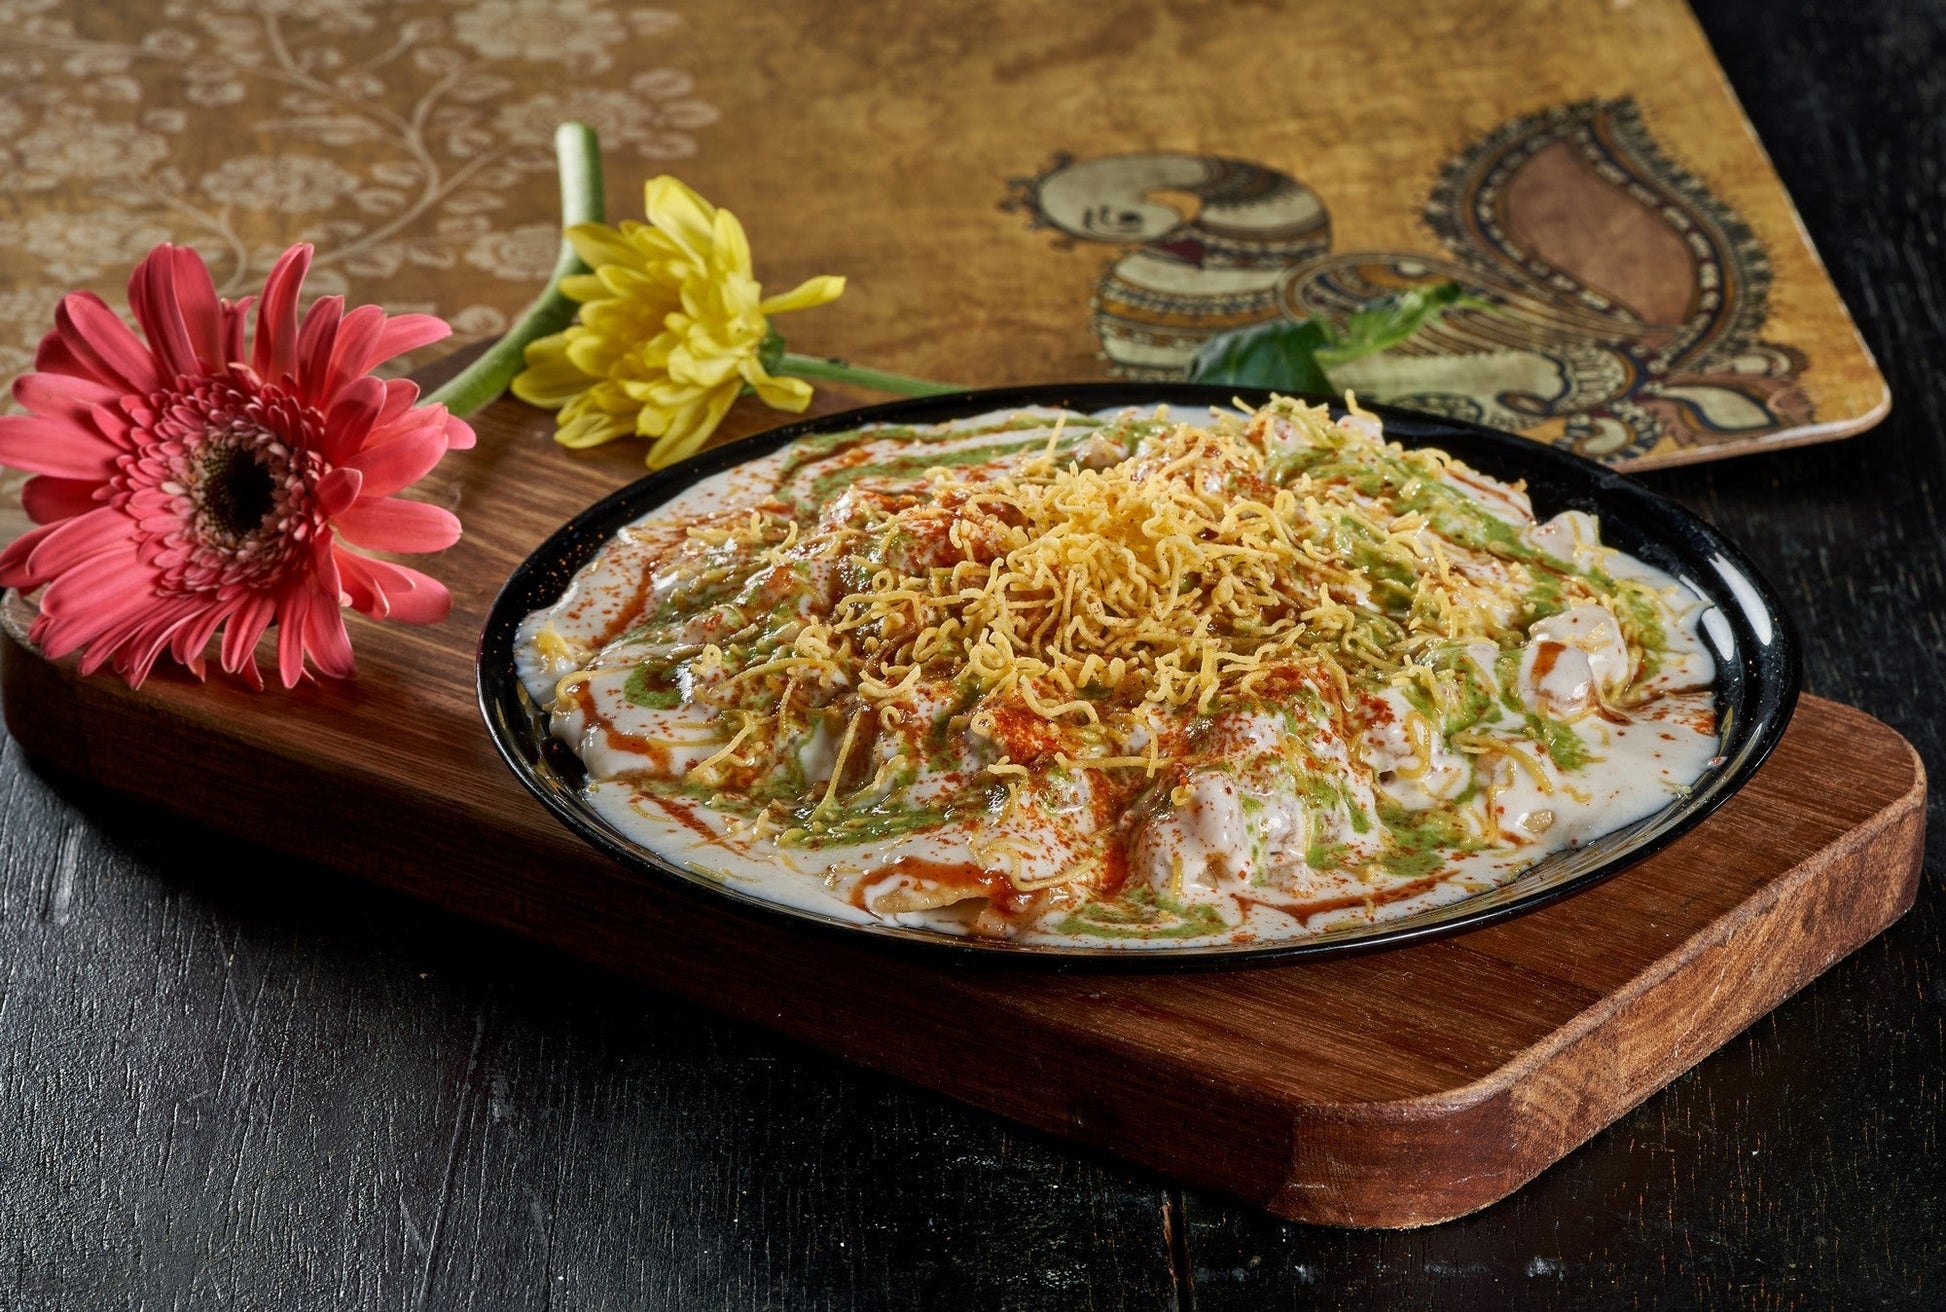 A colorful Papdi Chaat, a crispy cracker topped with savory chickpeas, yogurt, and chutneys